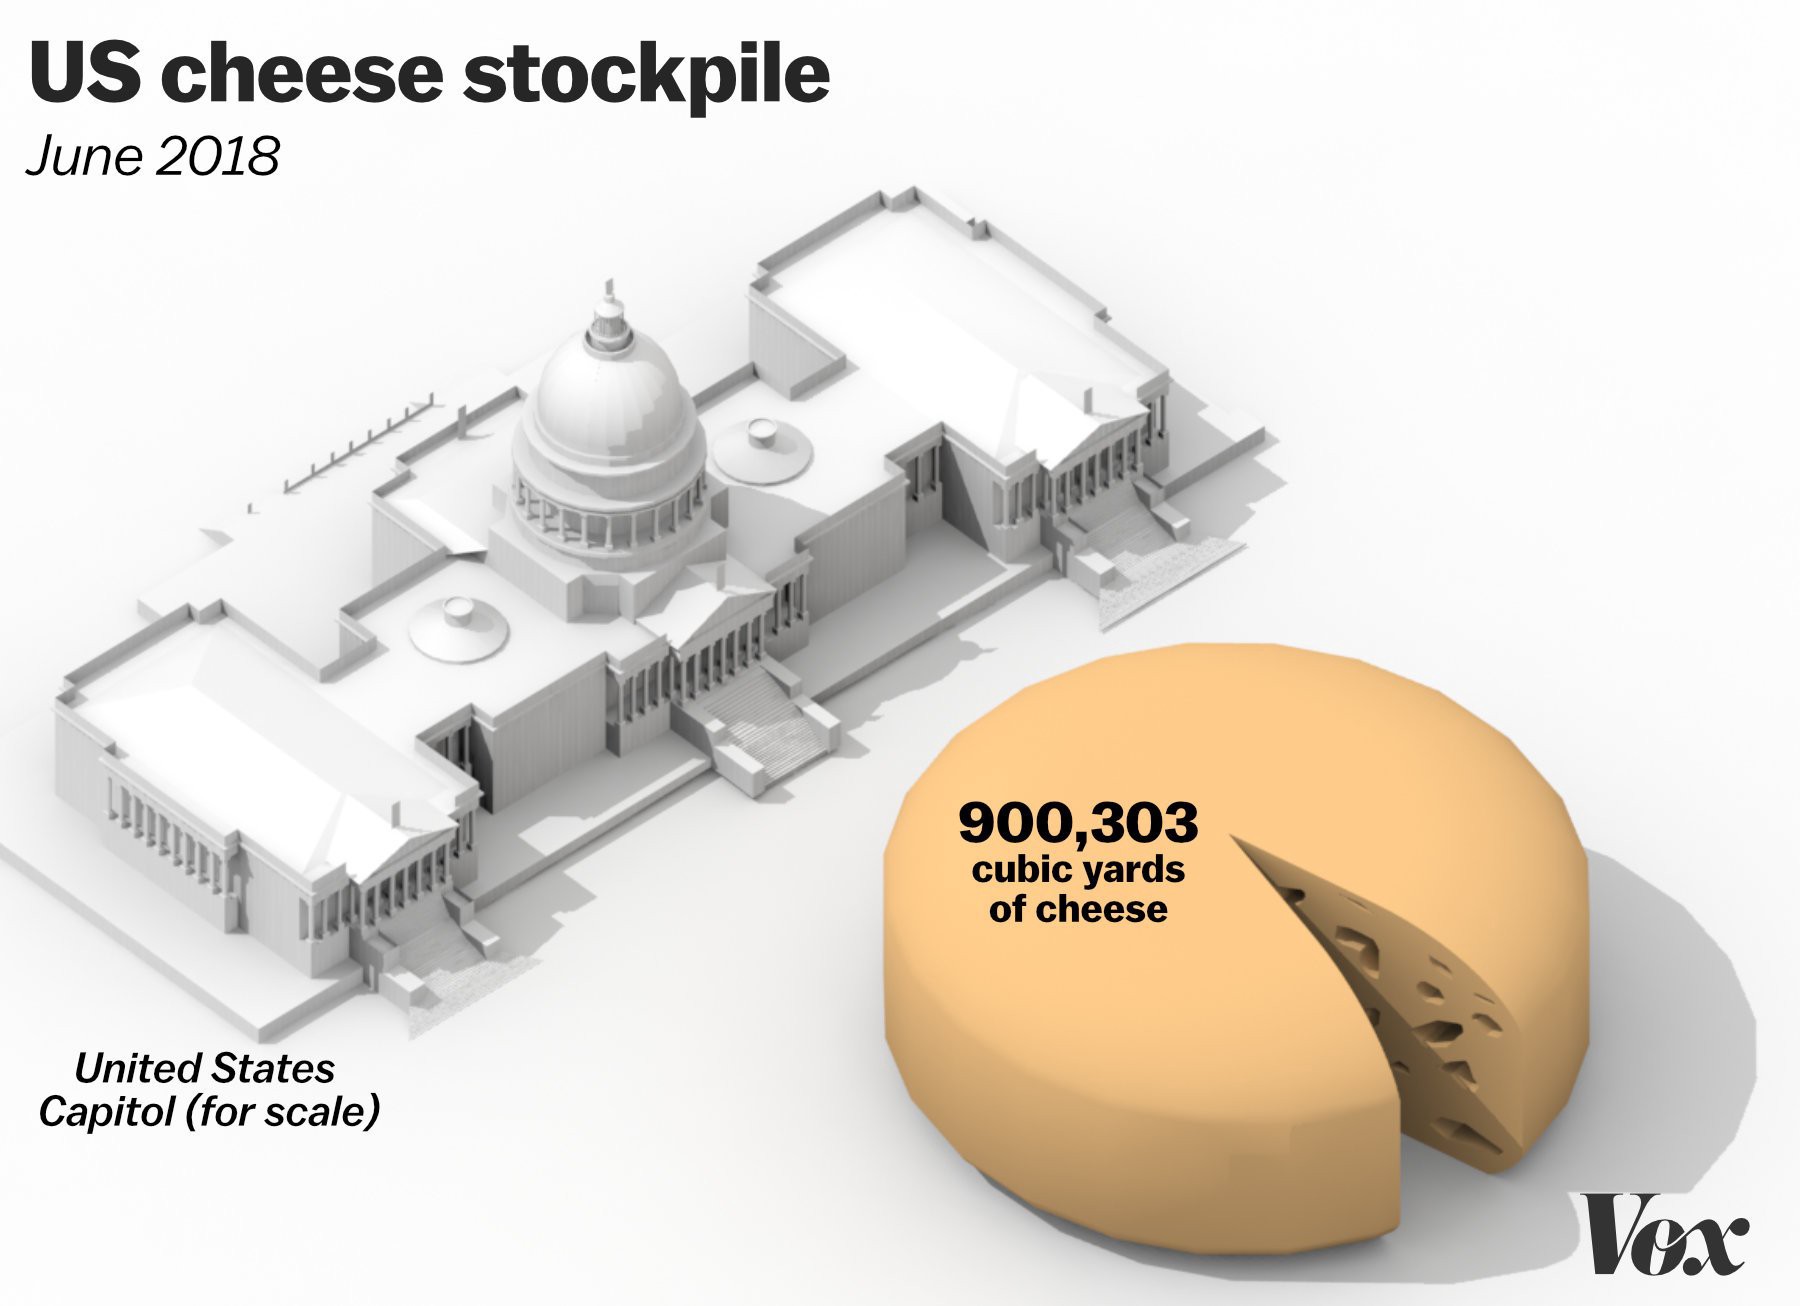 ‘The US has a 1.39 billion-pound surplus of cheese. Let’s try to visualize that.’ A Vox.com story from June 20218. (Graphic: